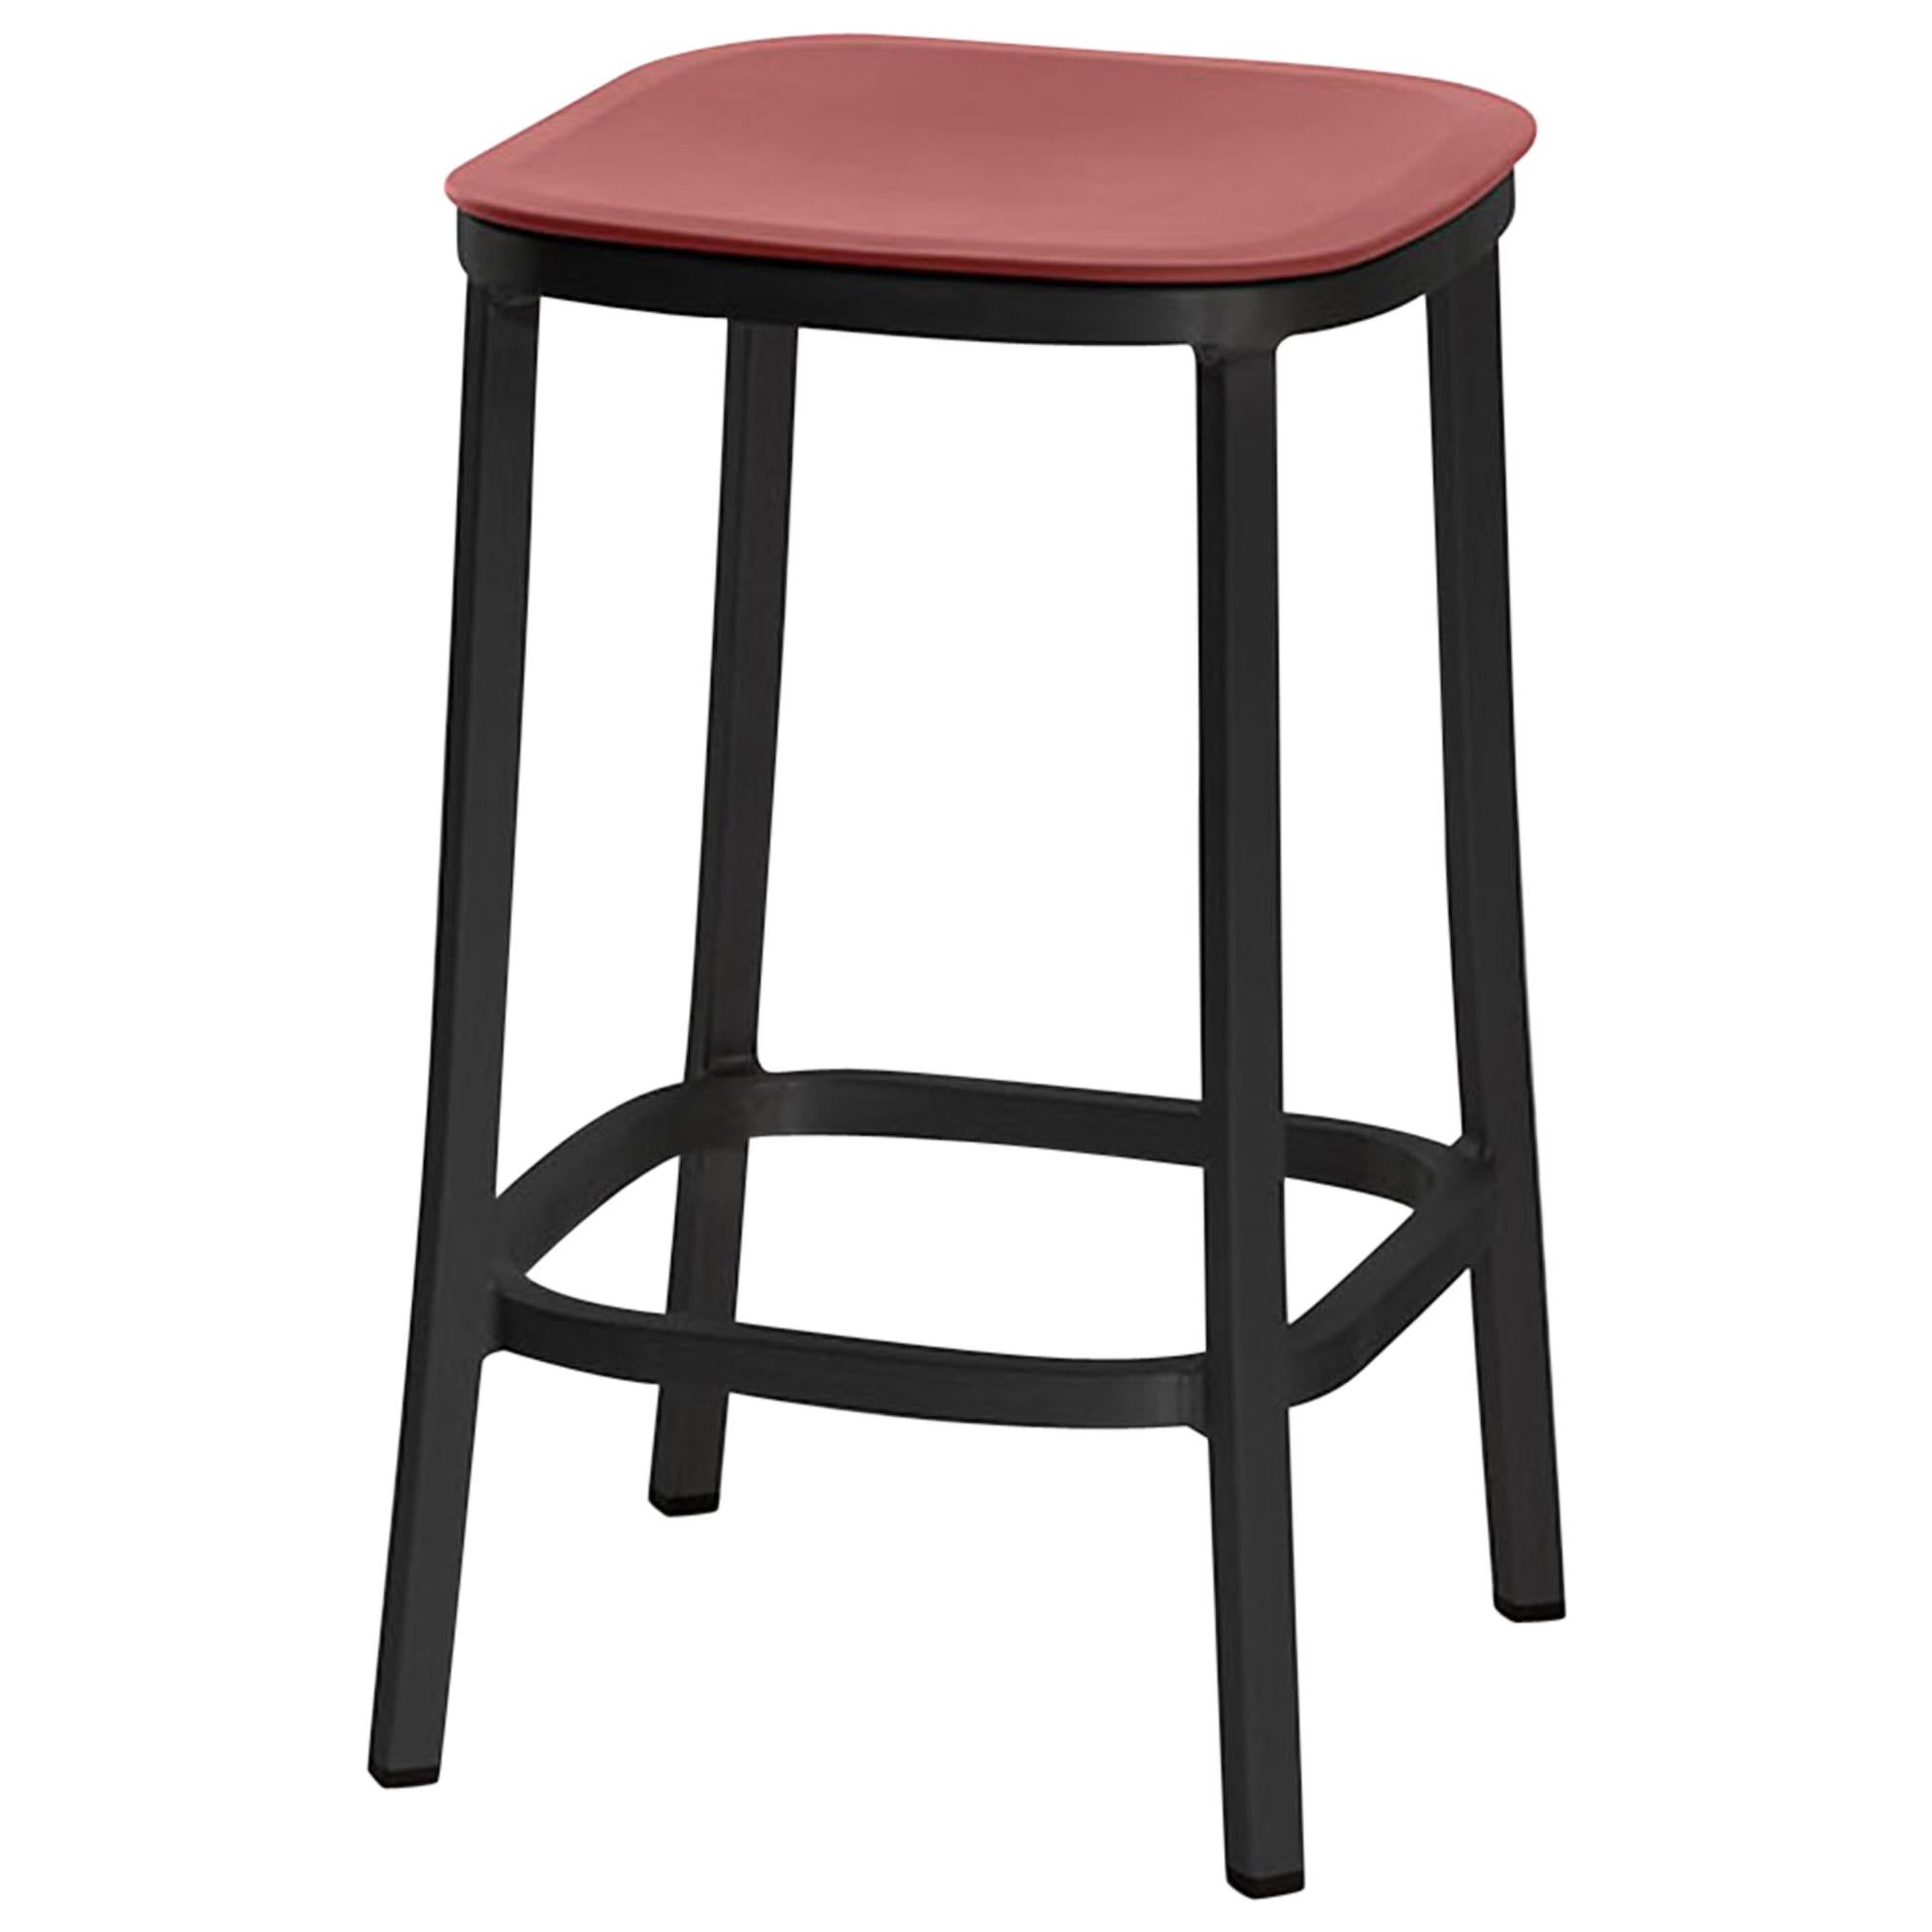 Emeco 1 Inch Counter Stool in Dark Aluminum and Red Ochre by Jasper Morrison For Sale